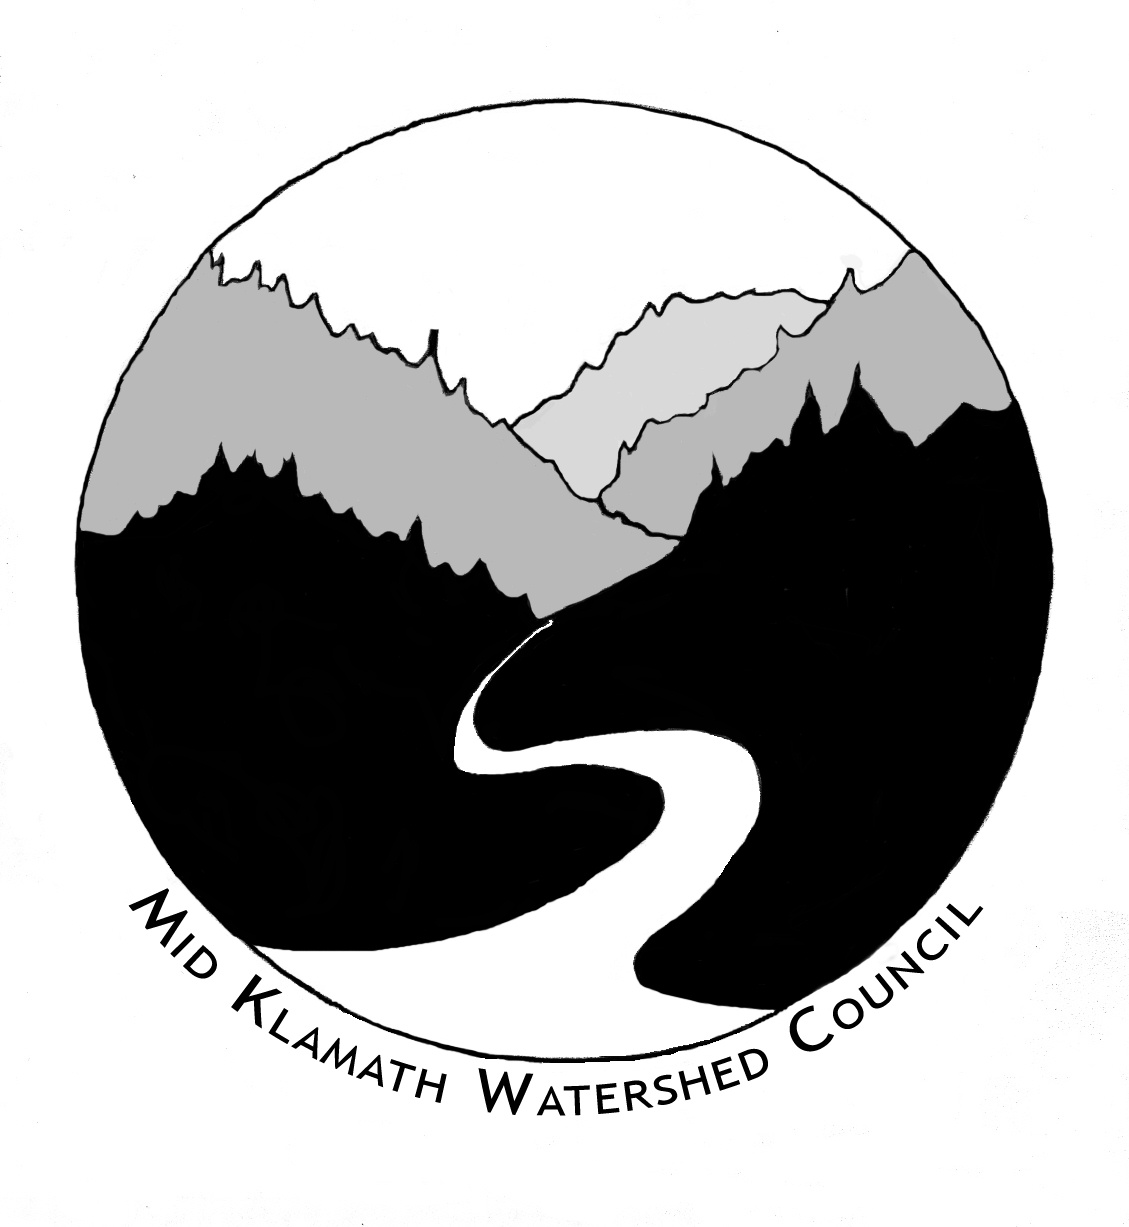 Mid Klamath Watershed Council logo - link opens in new window